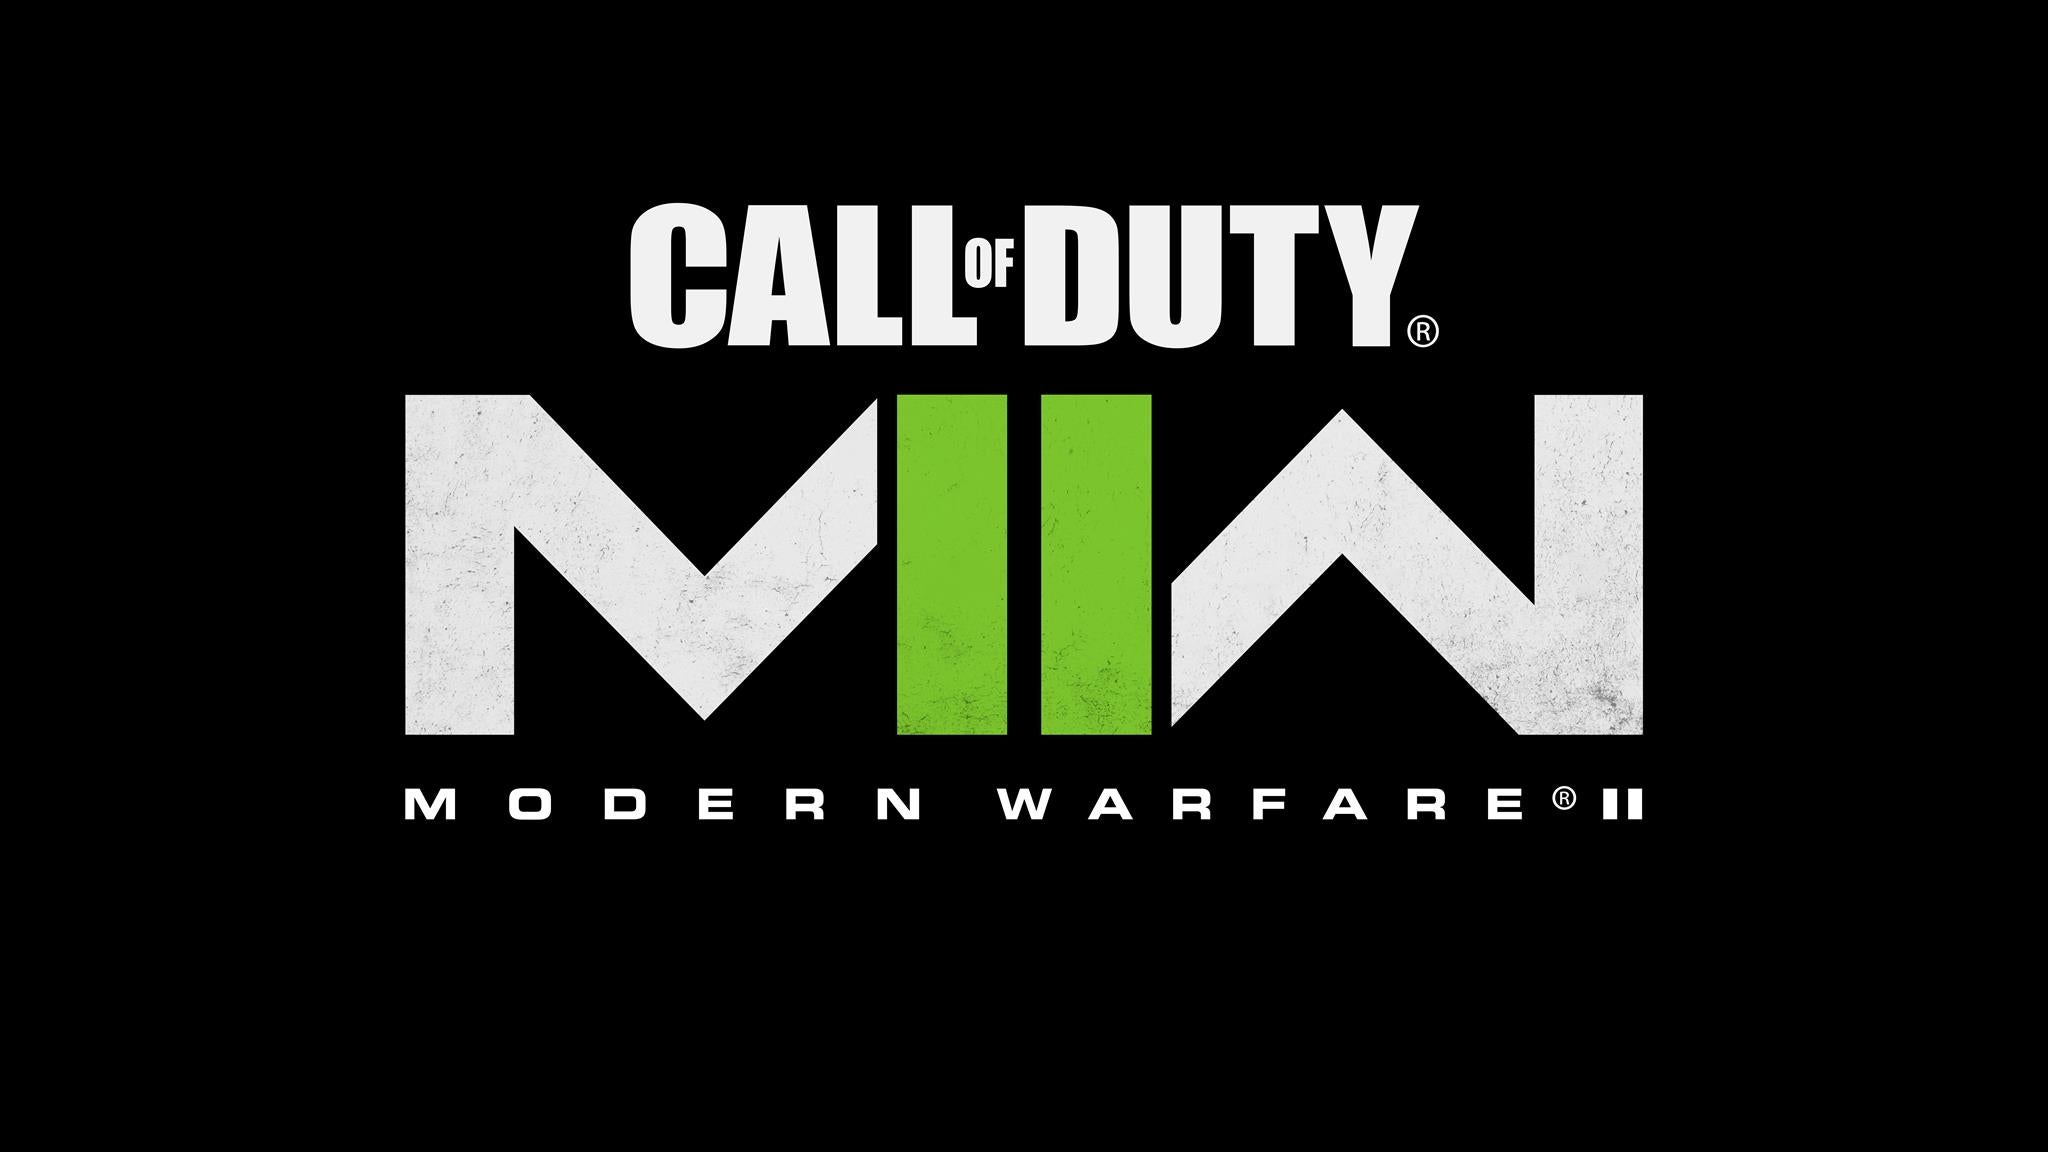 Image for Either Call of Duty: Modern Warfare 2 is coming to Steam, or someone made an unfortunate error